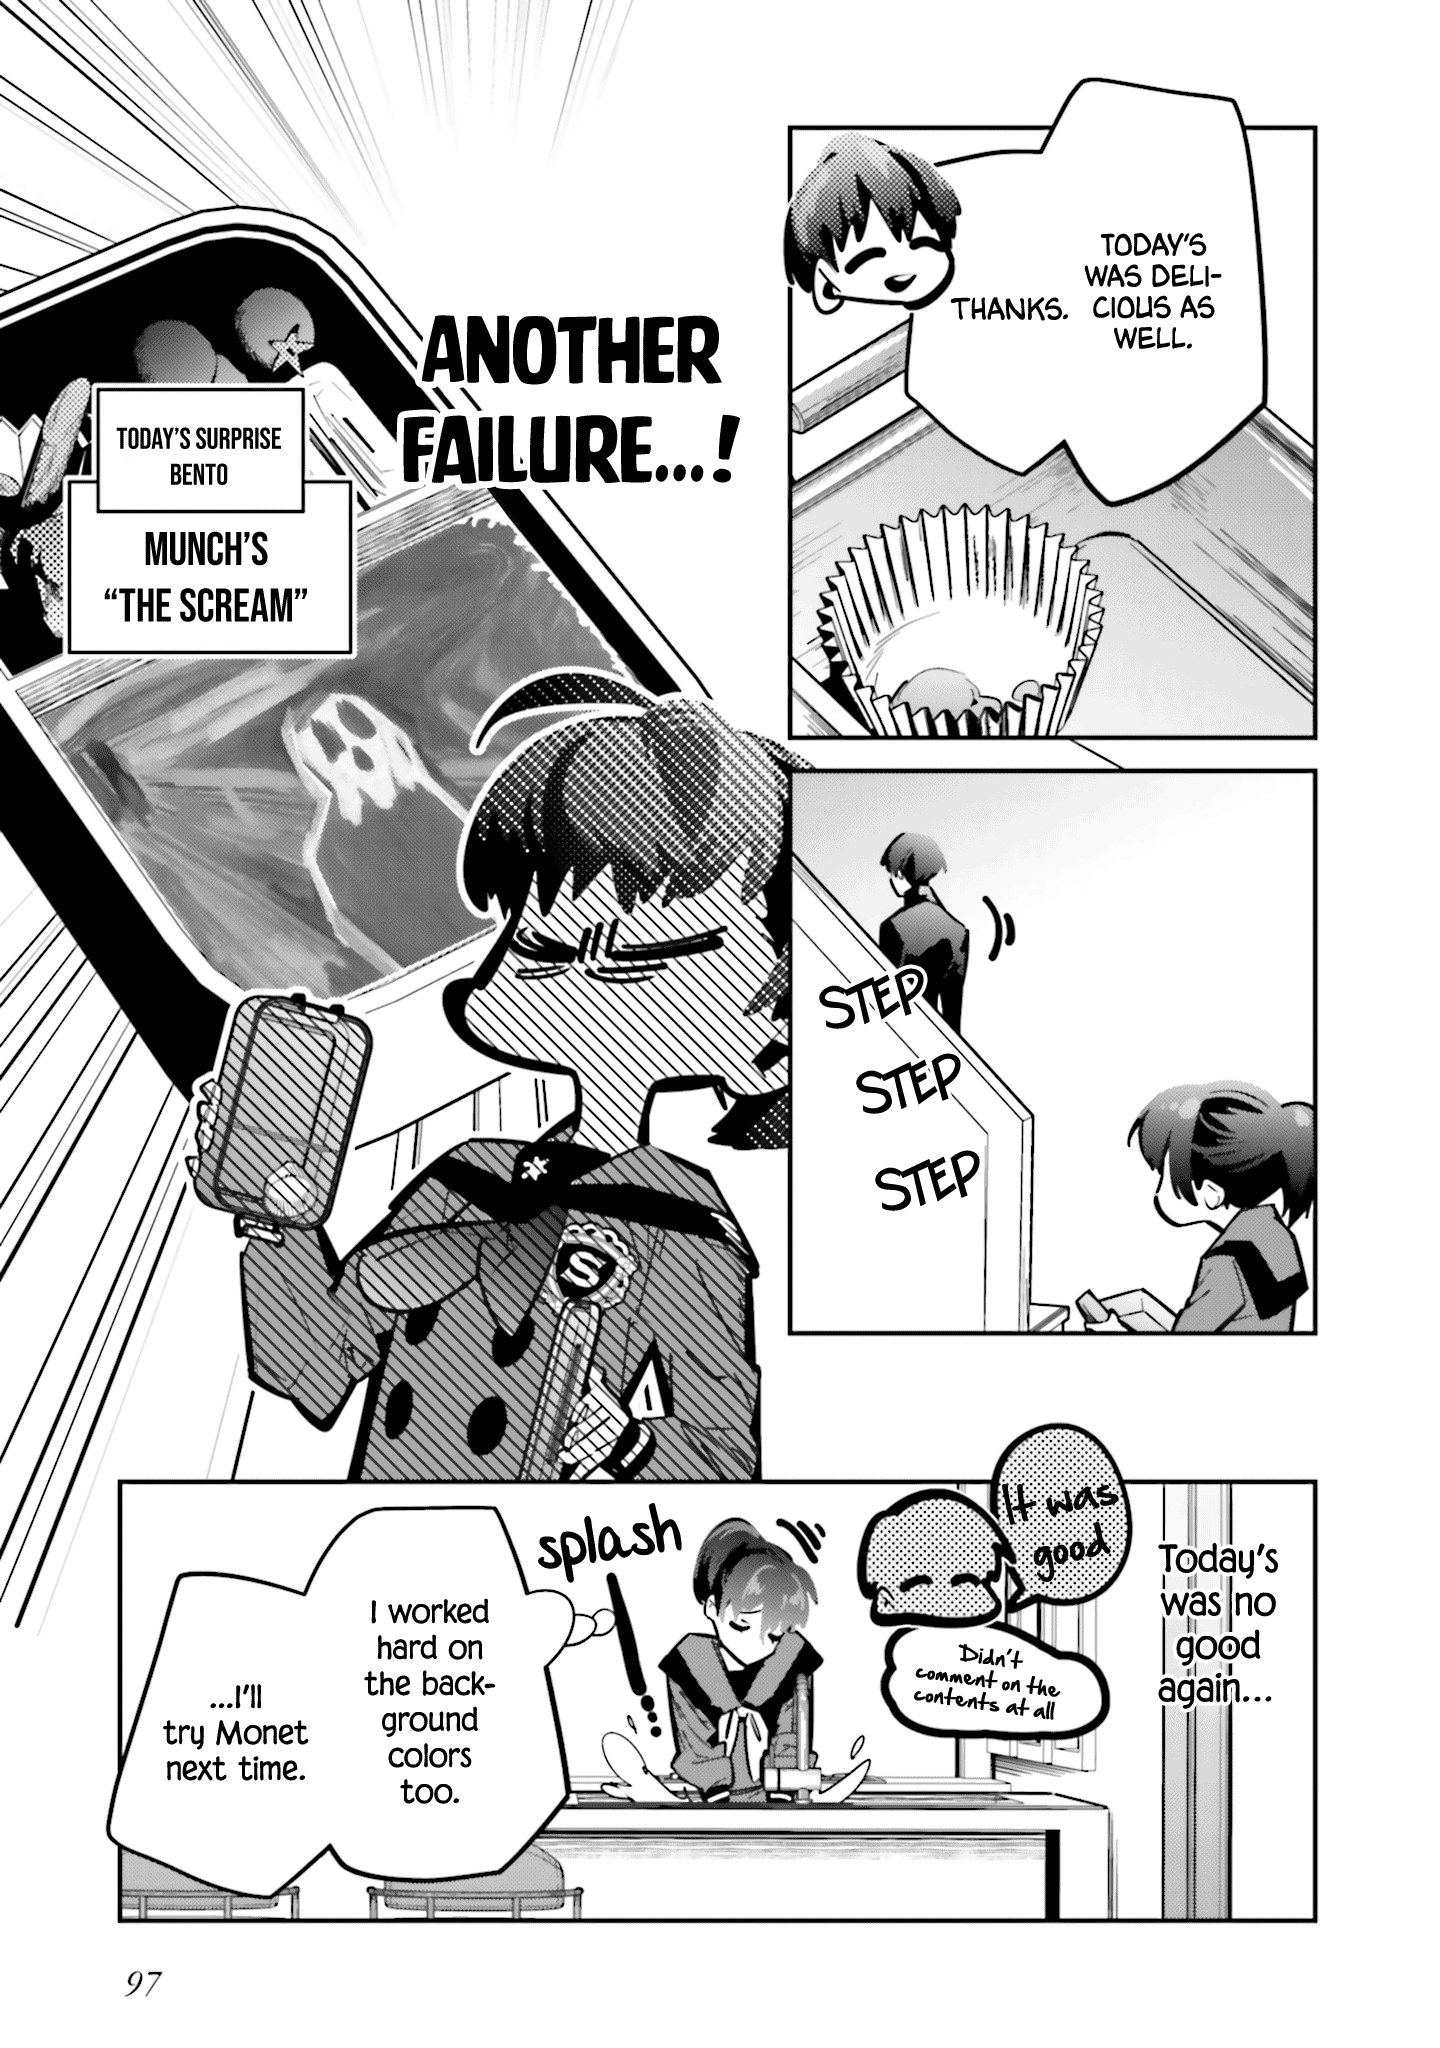 I Reincarnated As The Little Sister Of A Death Game Manga's Murder Mastermind And Failed - Page 3